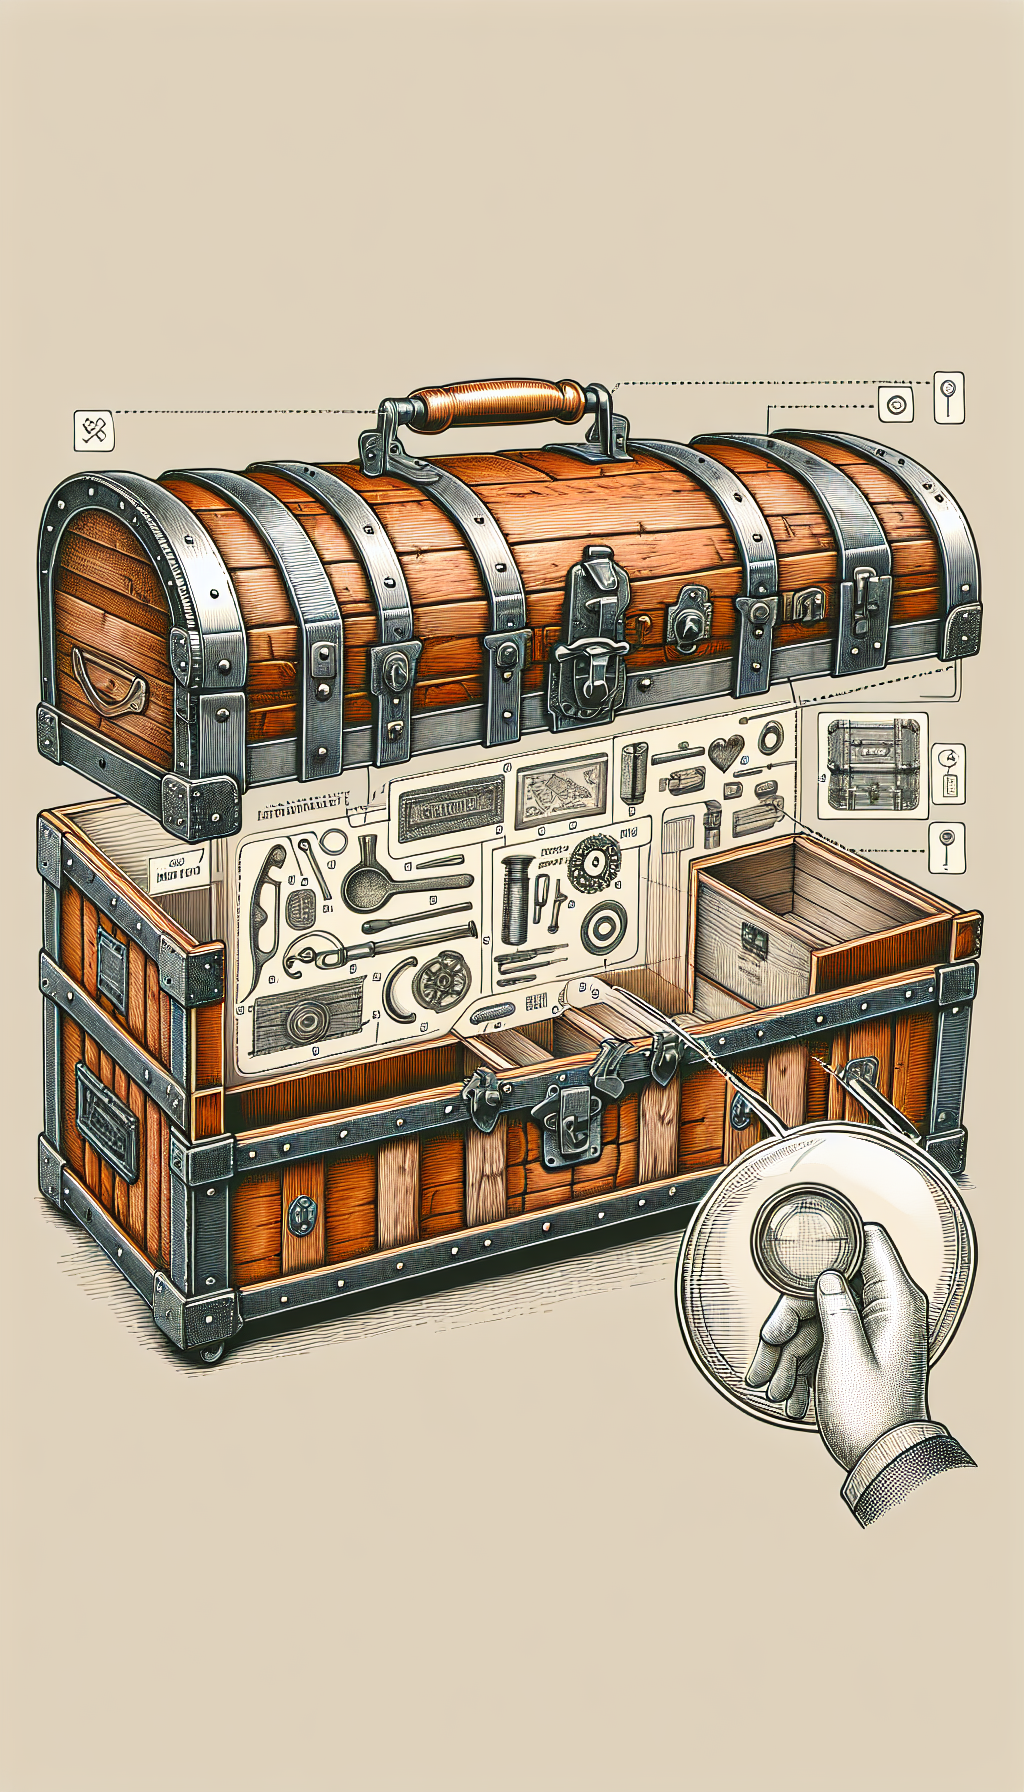 An intricate cross-section illustration of an antique steamer trunk, peeling away layers to reveal its craftsmanship. One side is realistic, showcasing wood textures and metal hardware, while the other side uses line art to highlight identifying features like unique lock mechanisms and manufacturer stamps, with a magnifying glass hovering over, symbolizing the identification process.